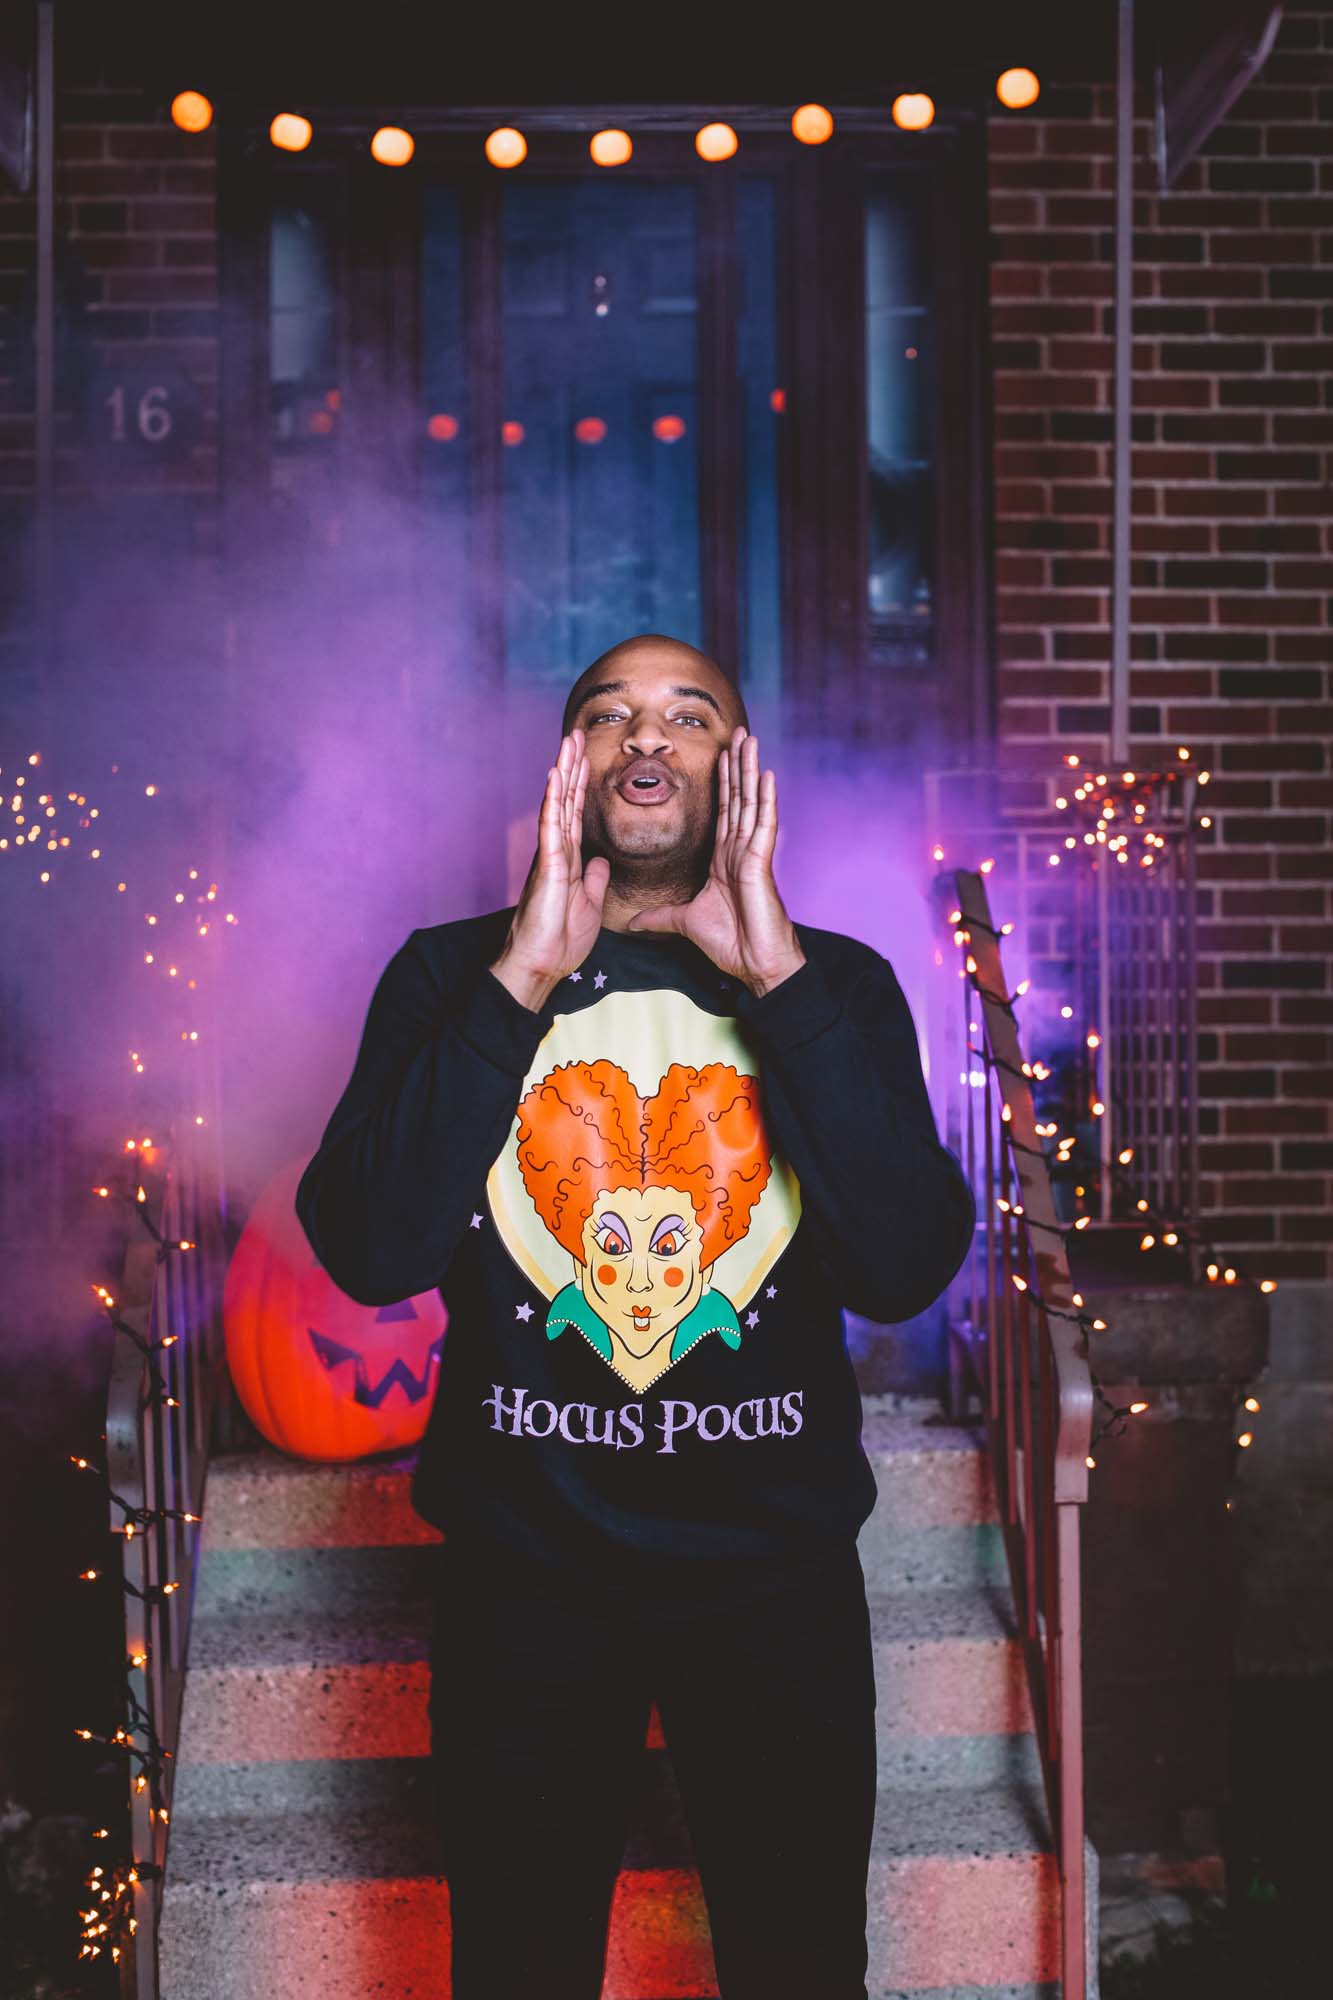 Sisters! You need this crewneck! Show your love for Hocus Pocus in this spellbinding sweater celebrating Winifred Sanderson. Featuring custom, retro-inspired artwork in printed details; this is the perfect cozy sweater for the Halloween season.